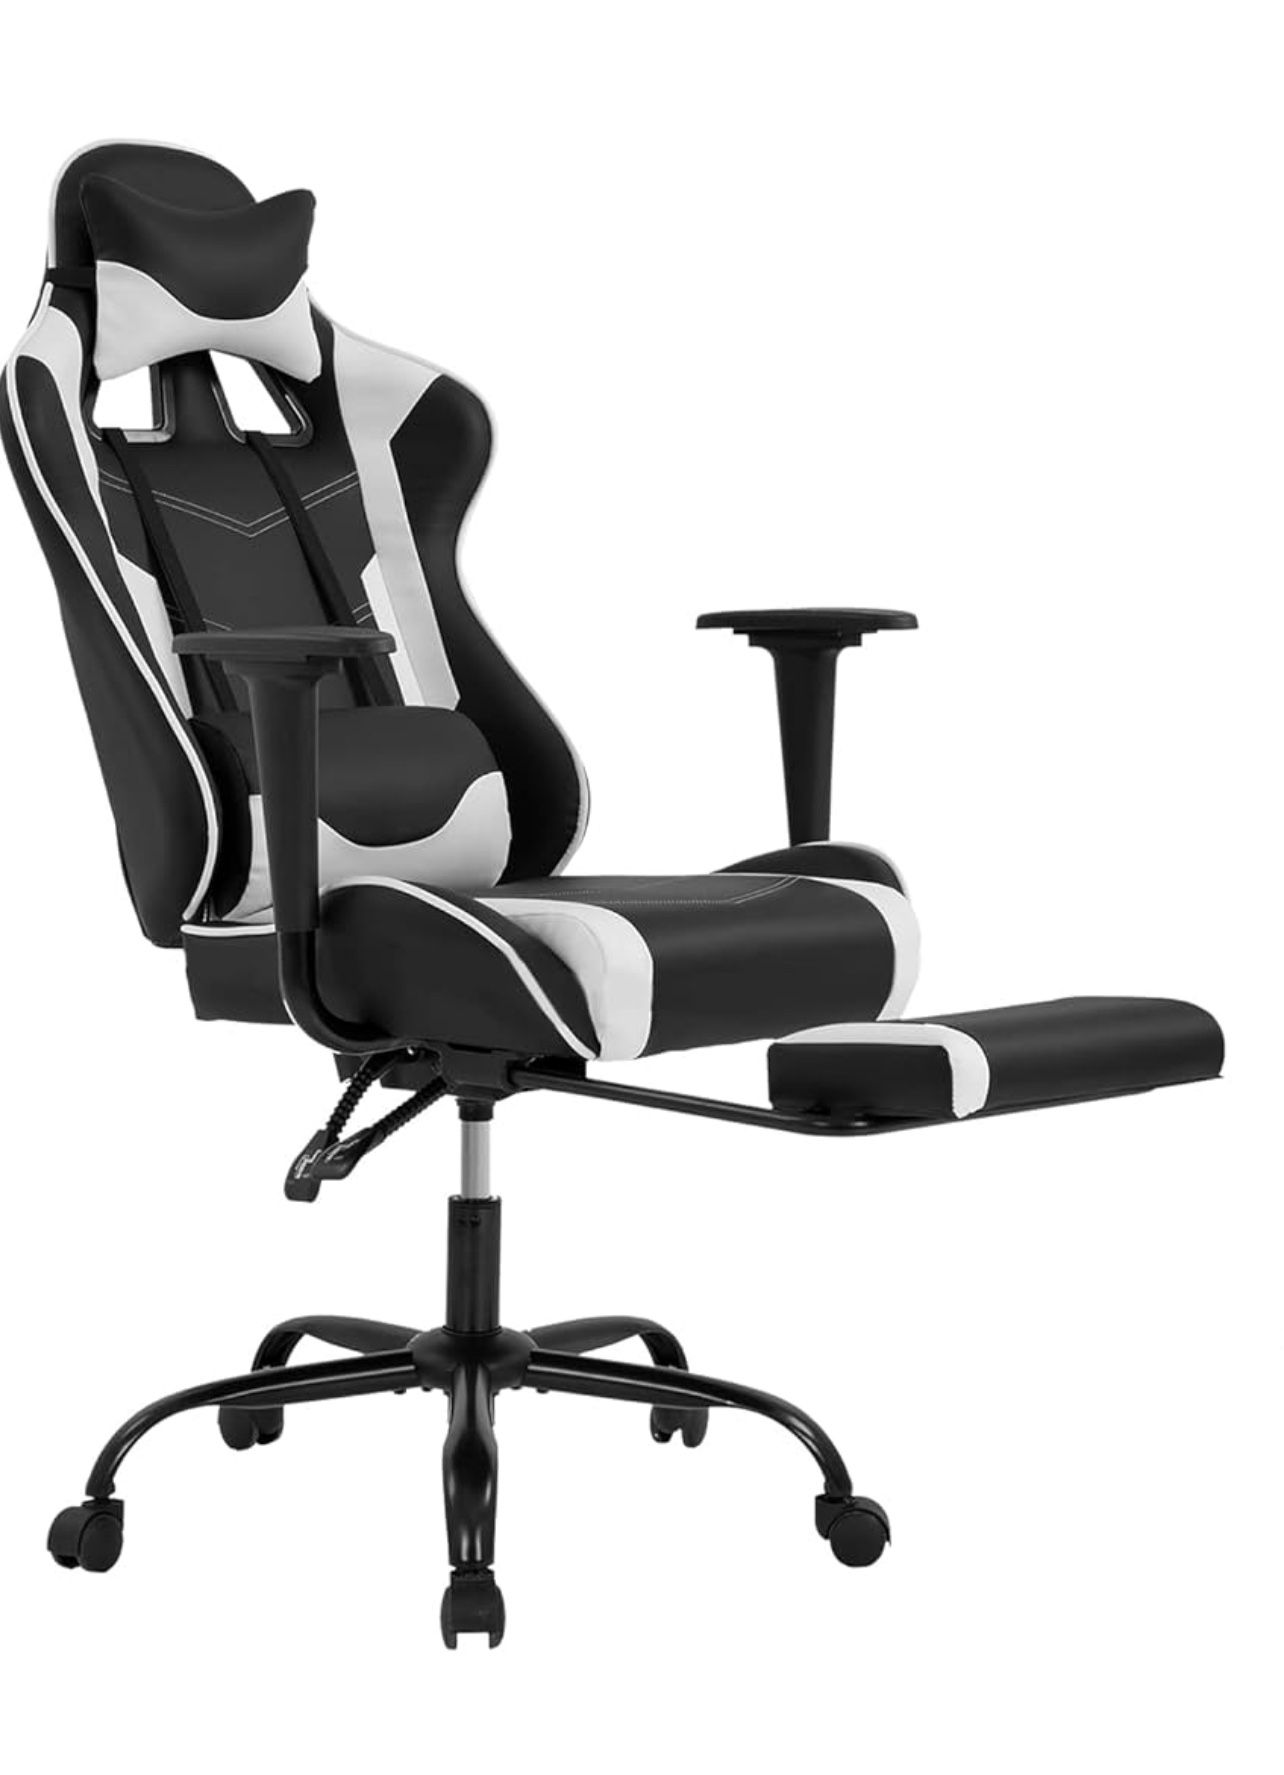 (BEST OFFER) Gaming Chair 